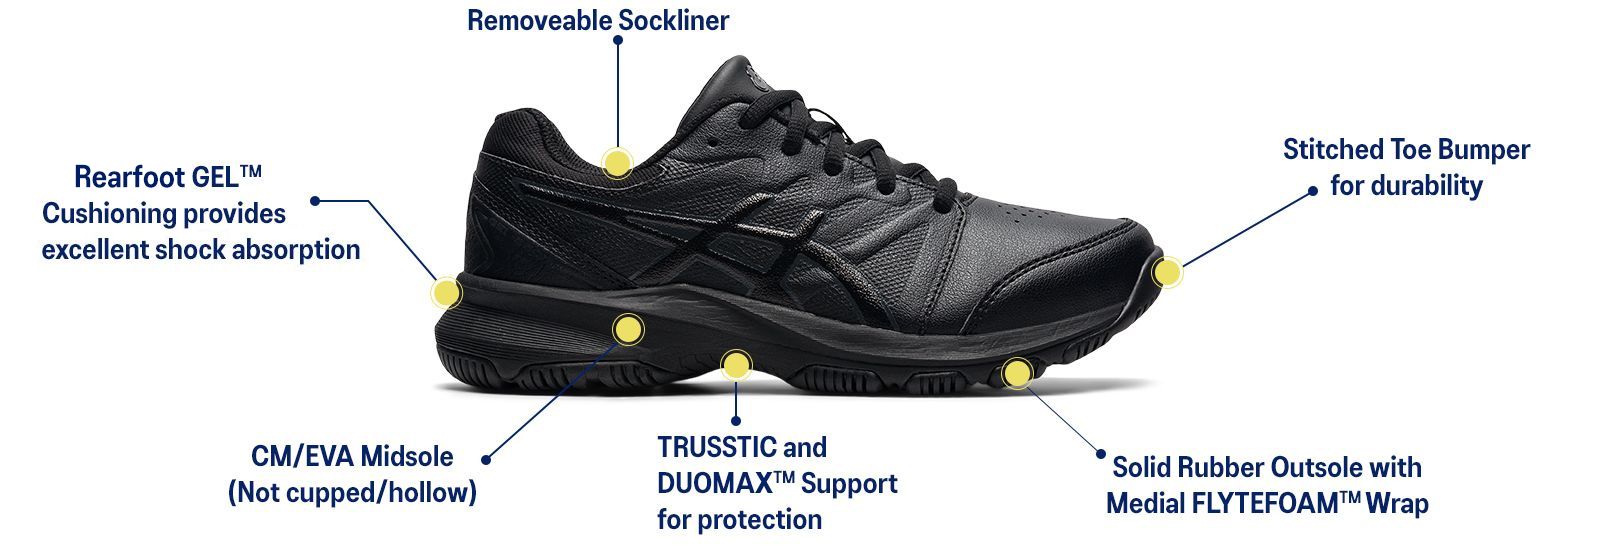 Removeable Sockliner, Rearfoot GEL Cushioning (excellent shock absorption), CM/EVA Midsole (not cupped/hollow), TRUSSTIC and DUOMAX Support (for protection), Stiched Toe Bumper (for durability), Solid Rubber Outsole with Medial FLYTEFOAM Wrap.